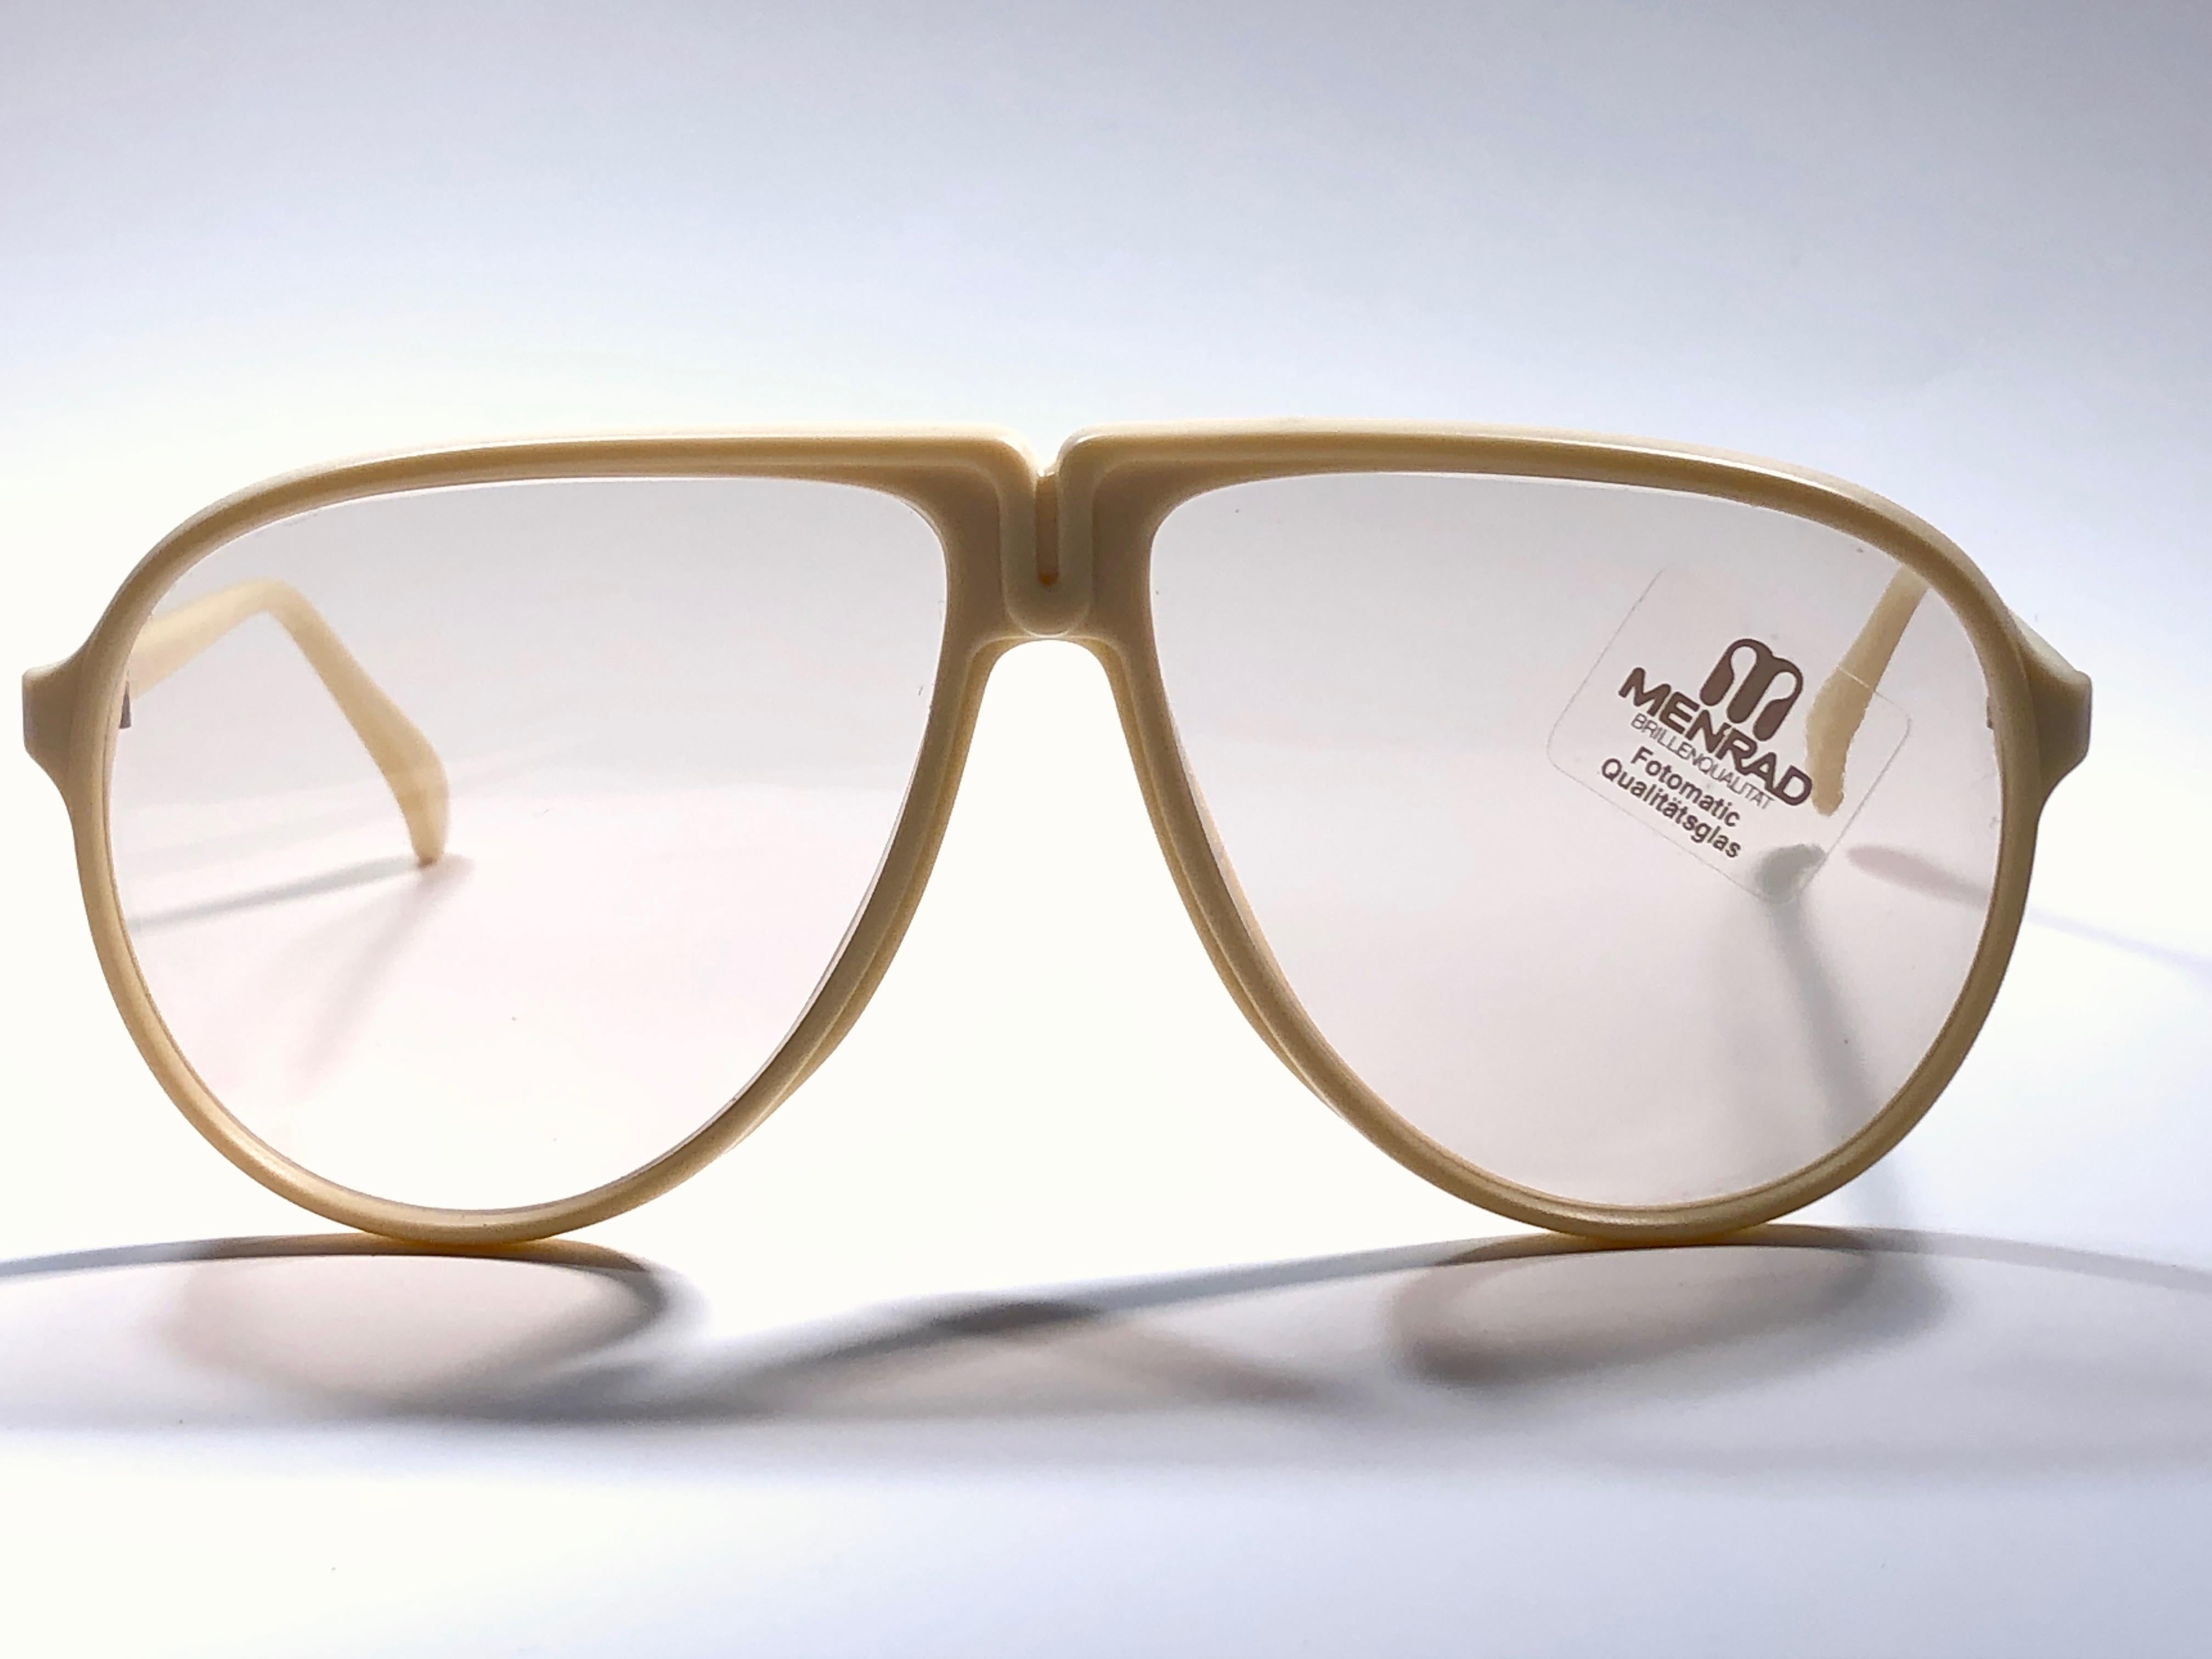 New Vintage Menrad Oversized Beige Sunglasses frame holding a spotless pair of changeable lenses.

Made in Germany in 1970's.

This item may show minor sign of wear due to storage.

Front : 15 cms

Lens Width : 6 cms.

Lens Height : 5 cms. 


